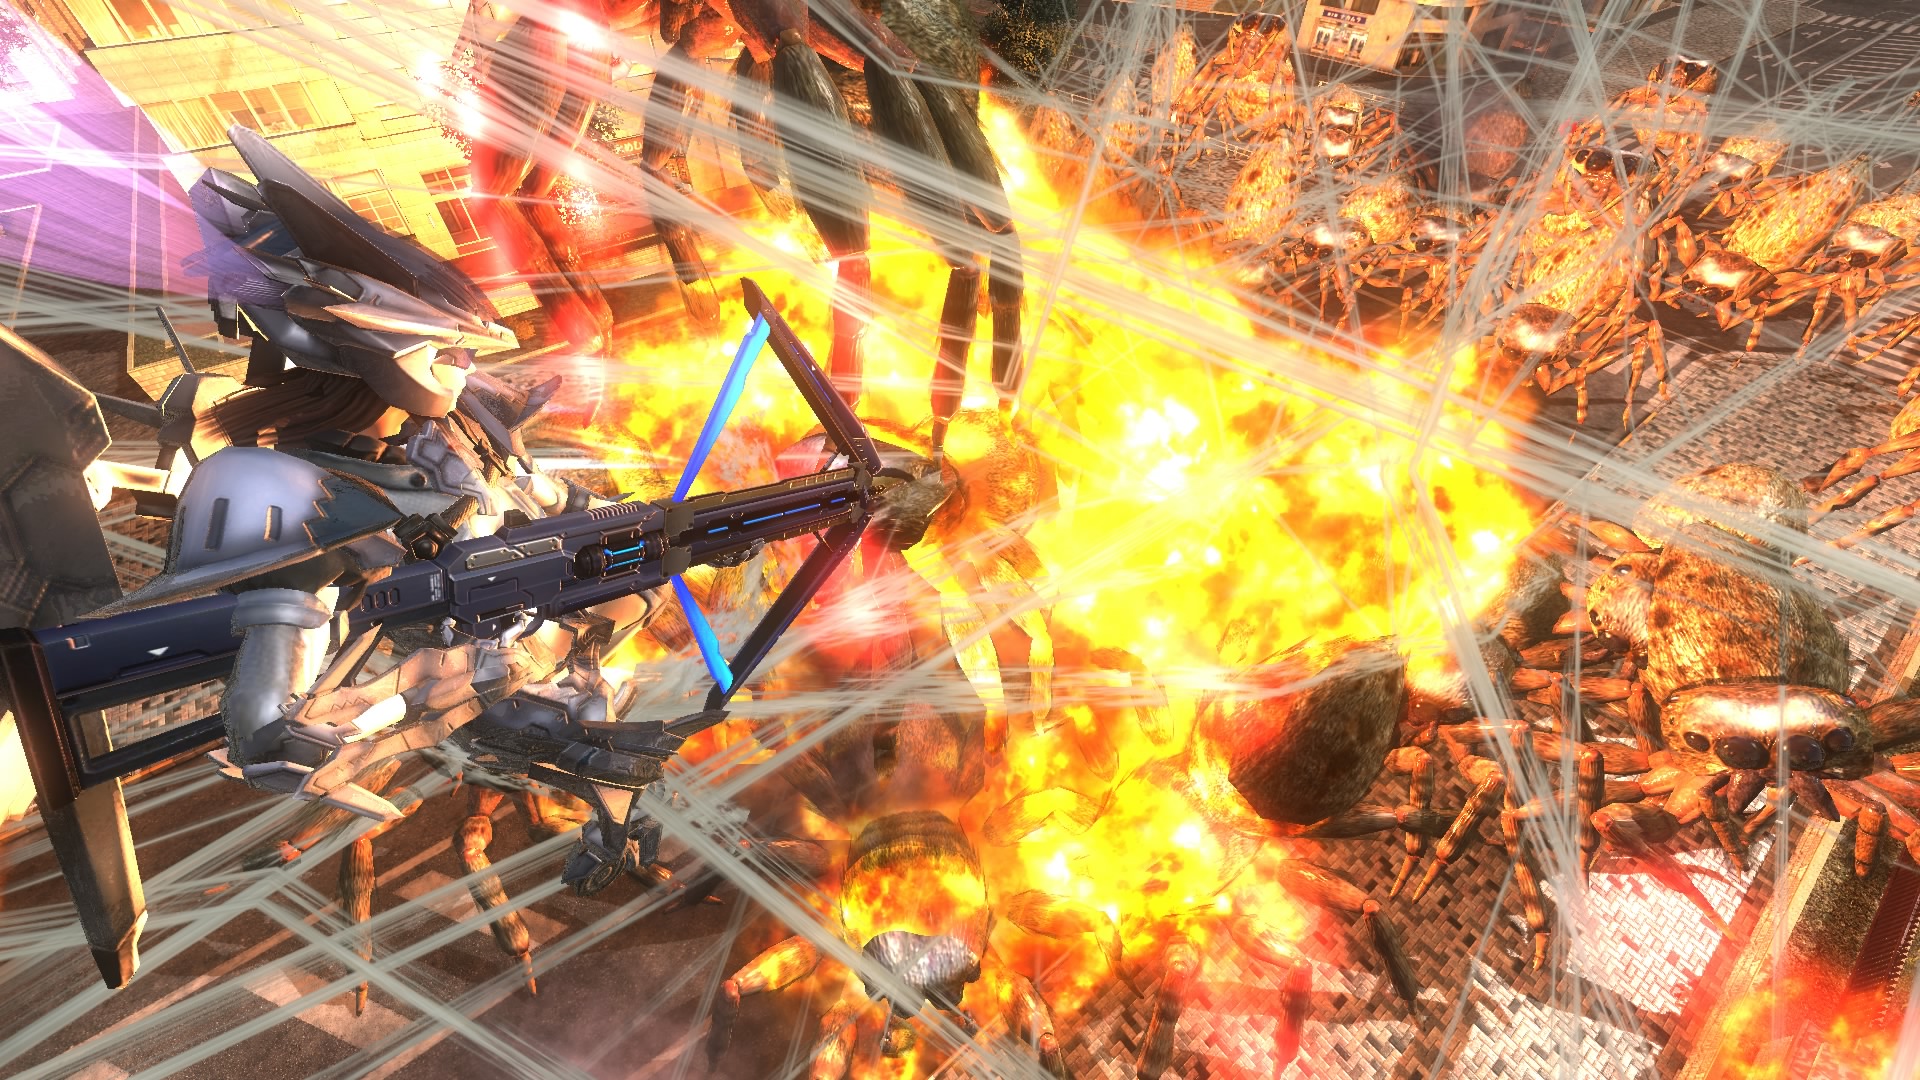 EARTH DEFENSE FORCE 41 The Shadow of New Despair